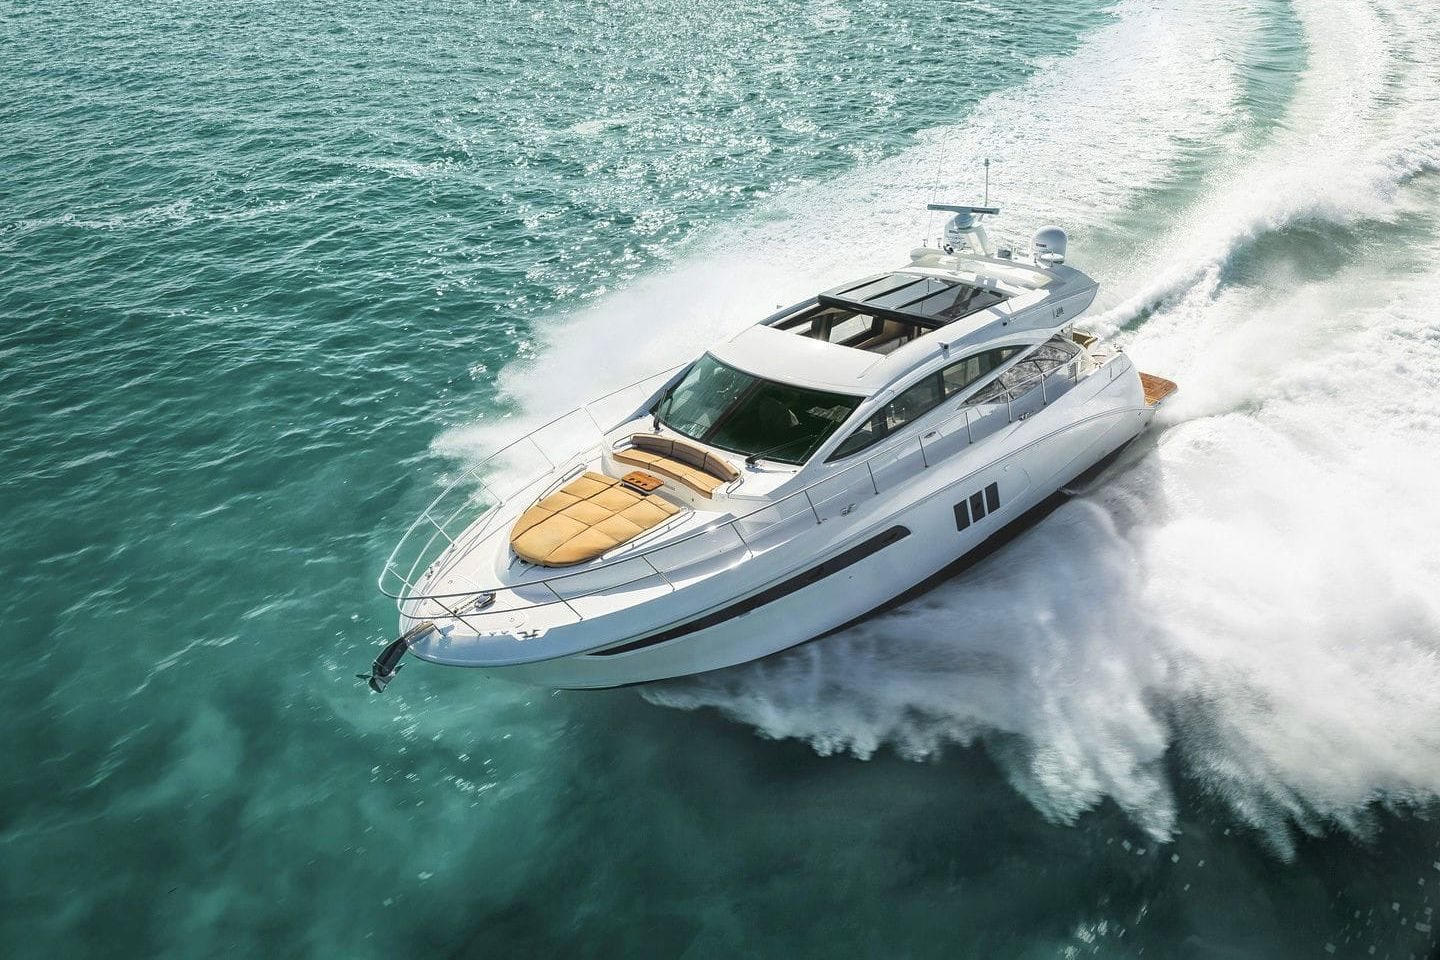 360 VR Virtual Tours of the Sea Ray L590